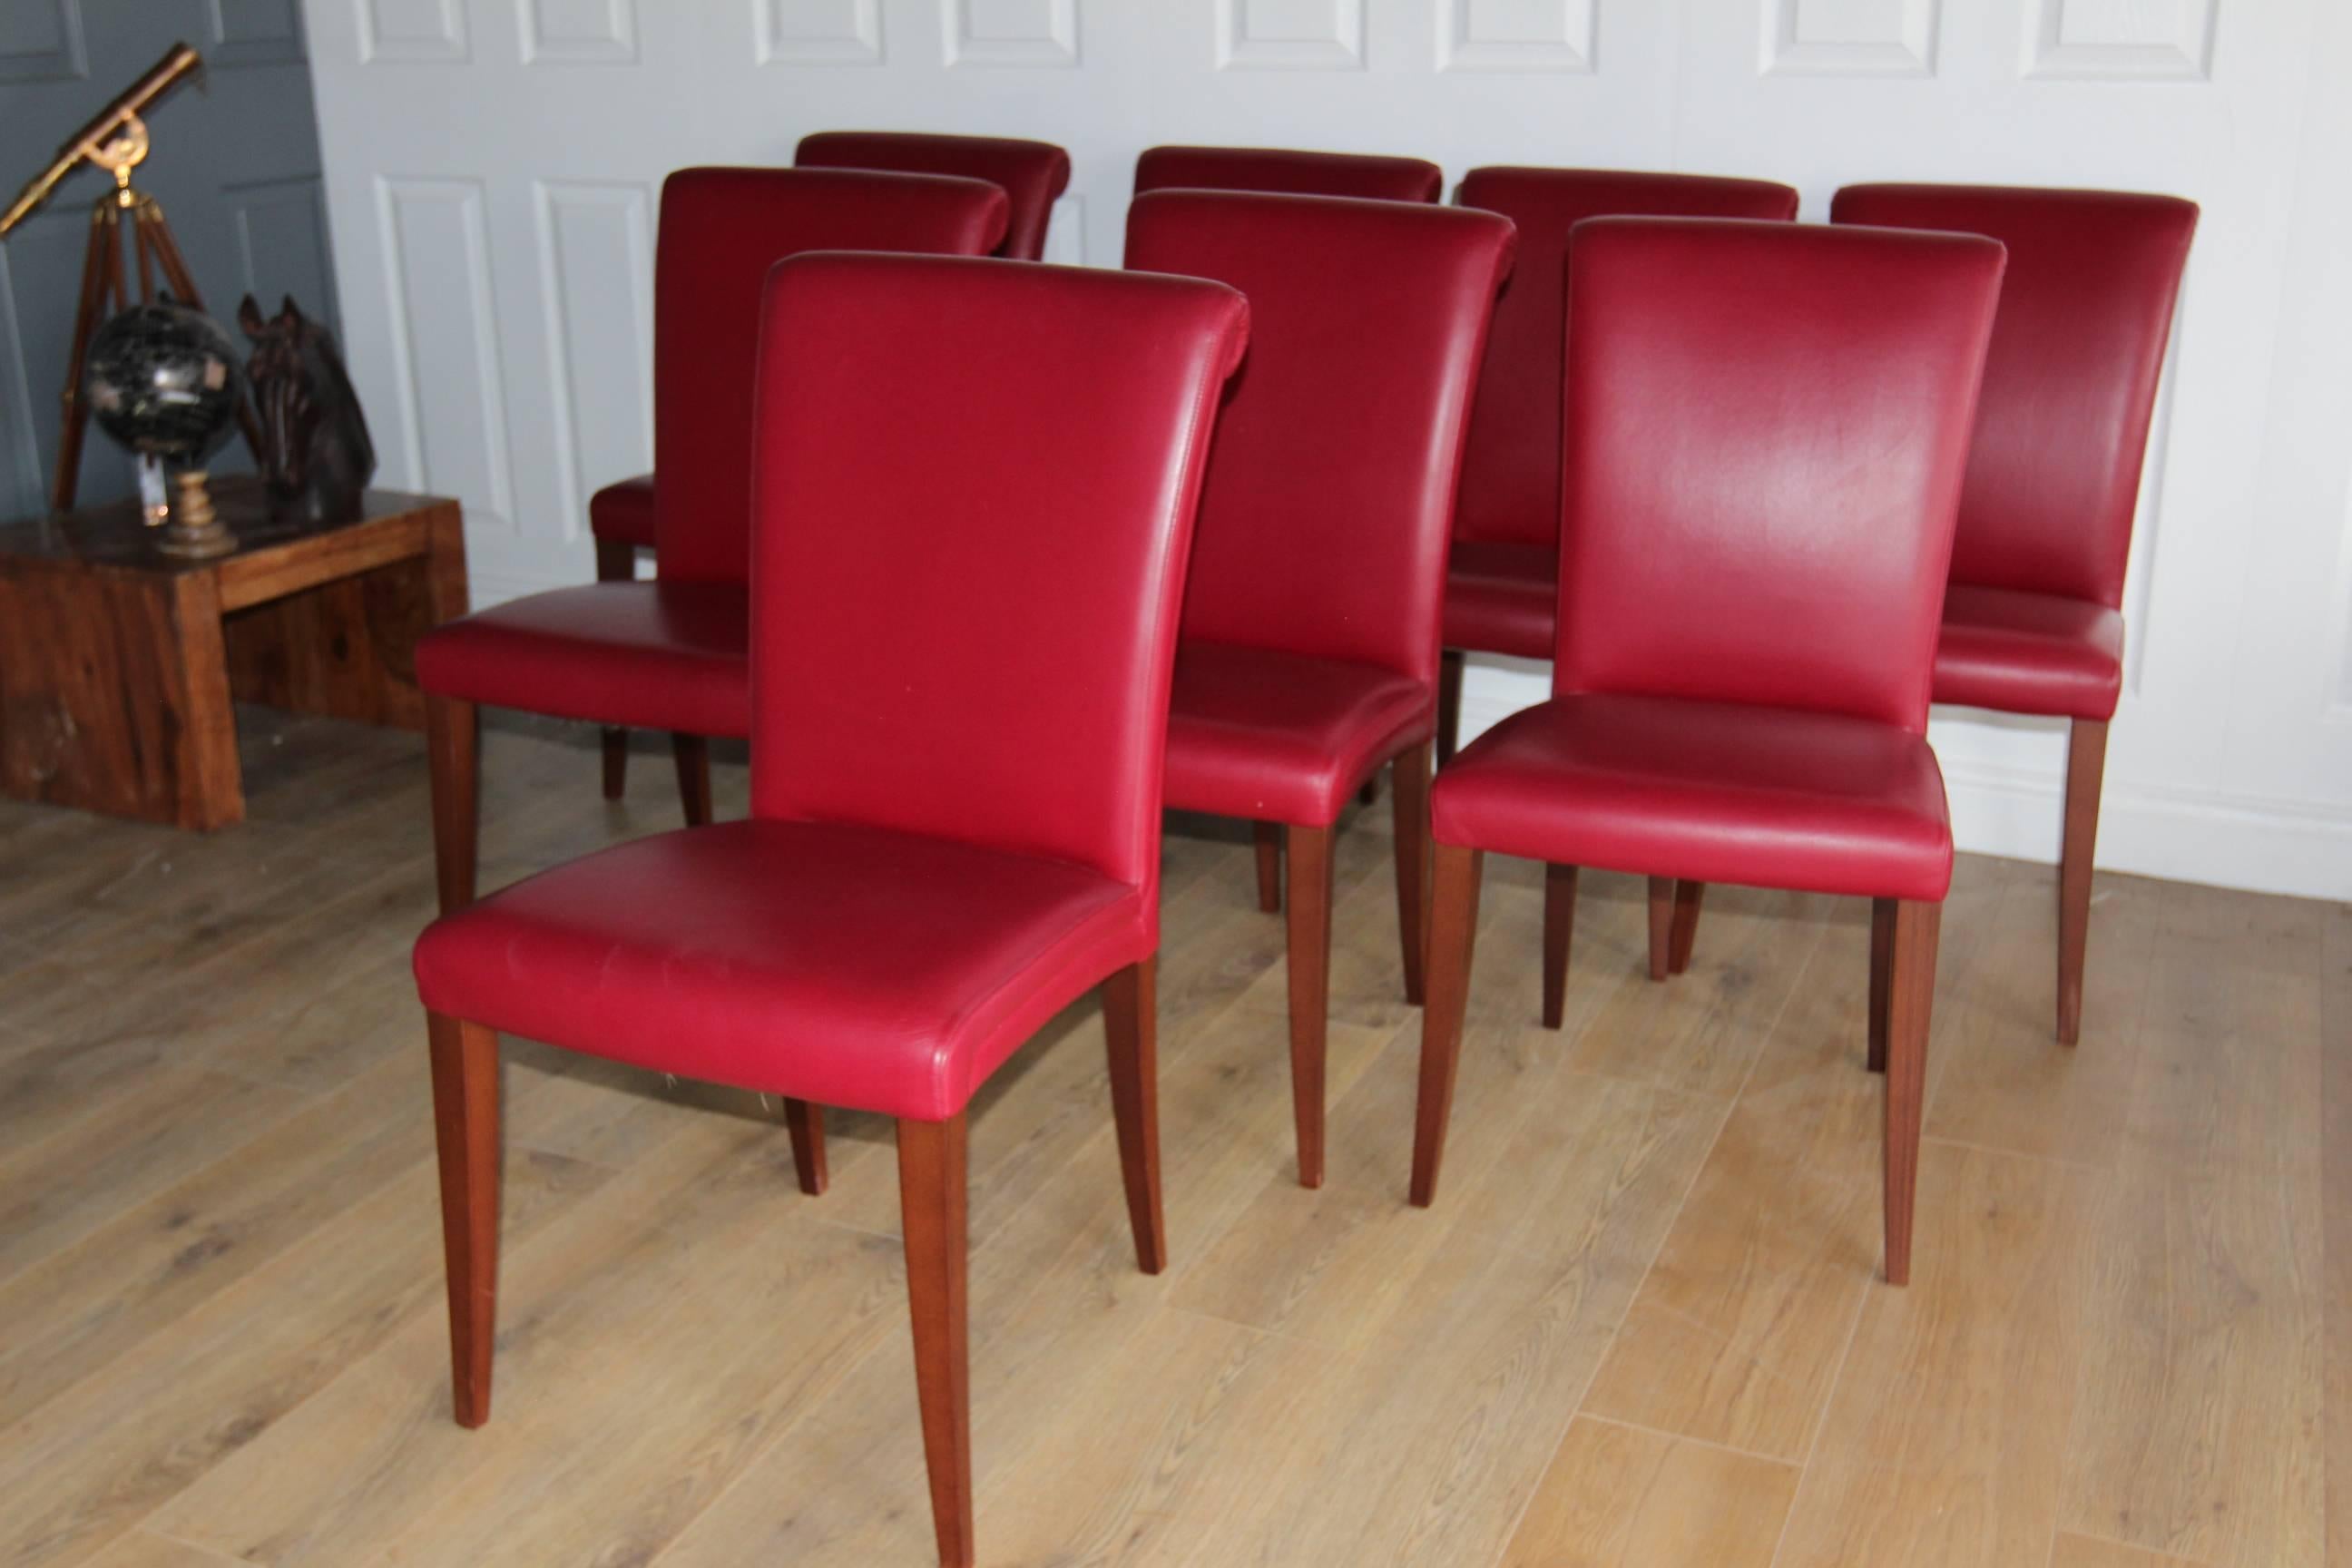 Poltrona Frau 'Vittoria' set of eight dining chairs in claret leather
with stained beech legs
approx £7200 new today
current model
in very good condition

The Vittoria series is known for its unusual back, which finishes in an elegant swirl